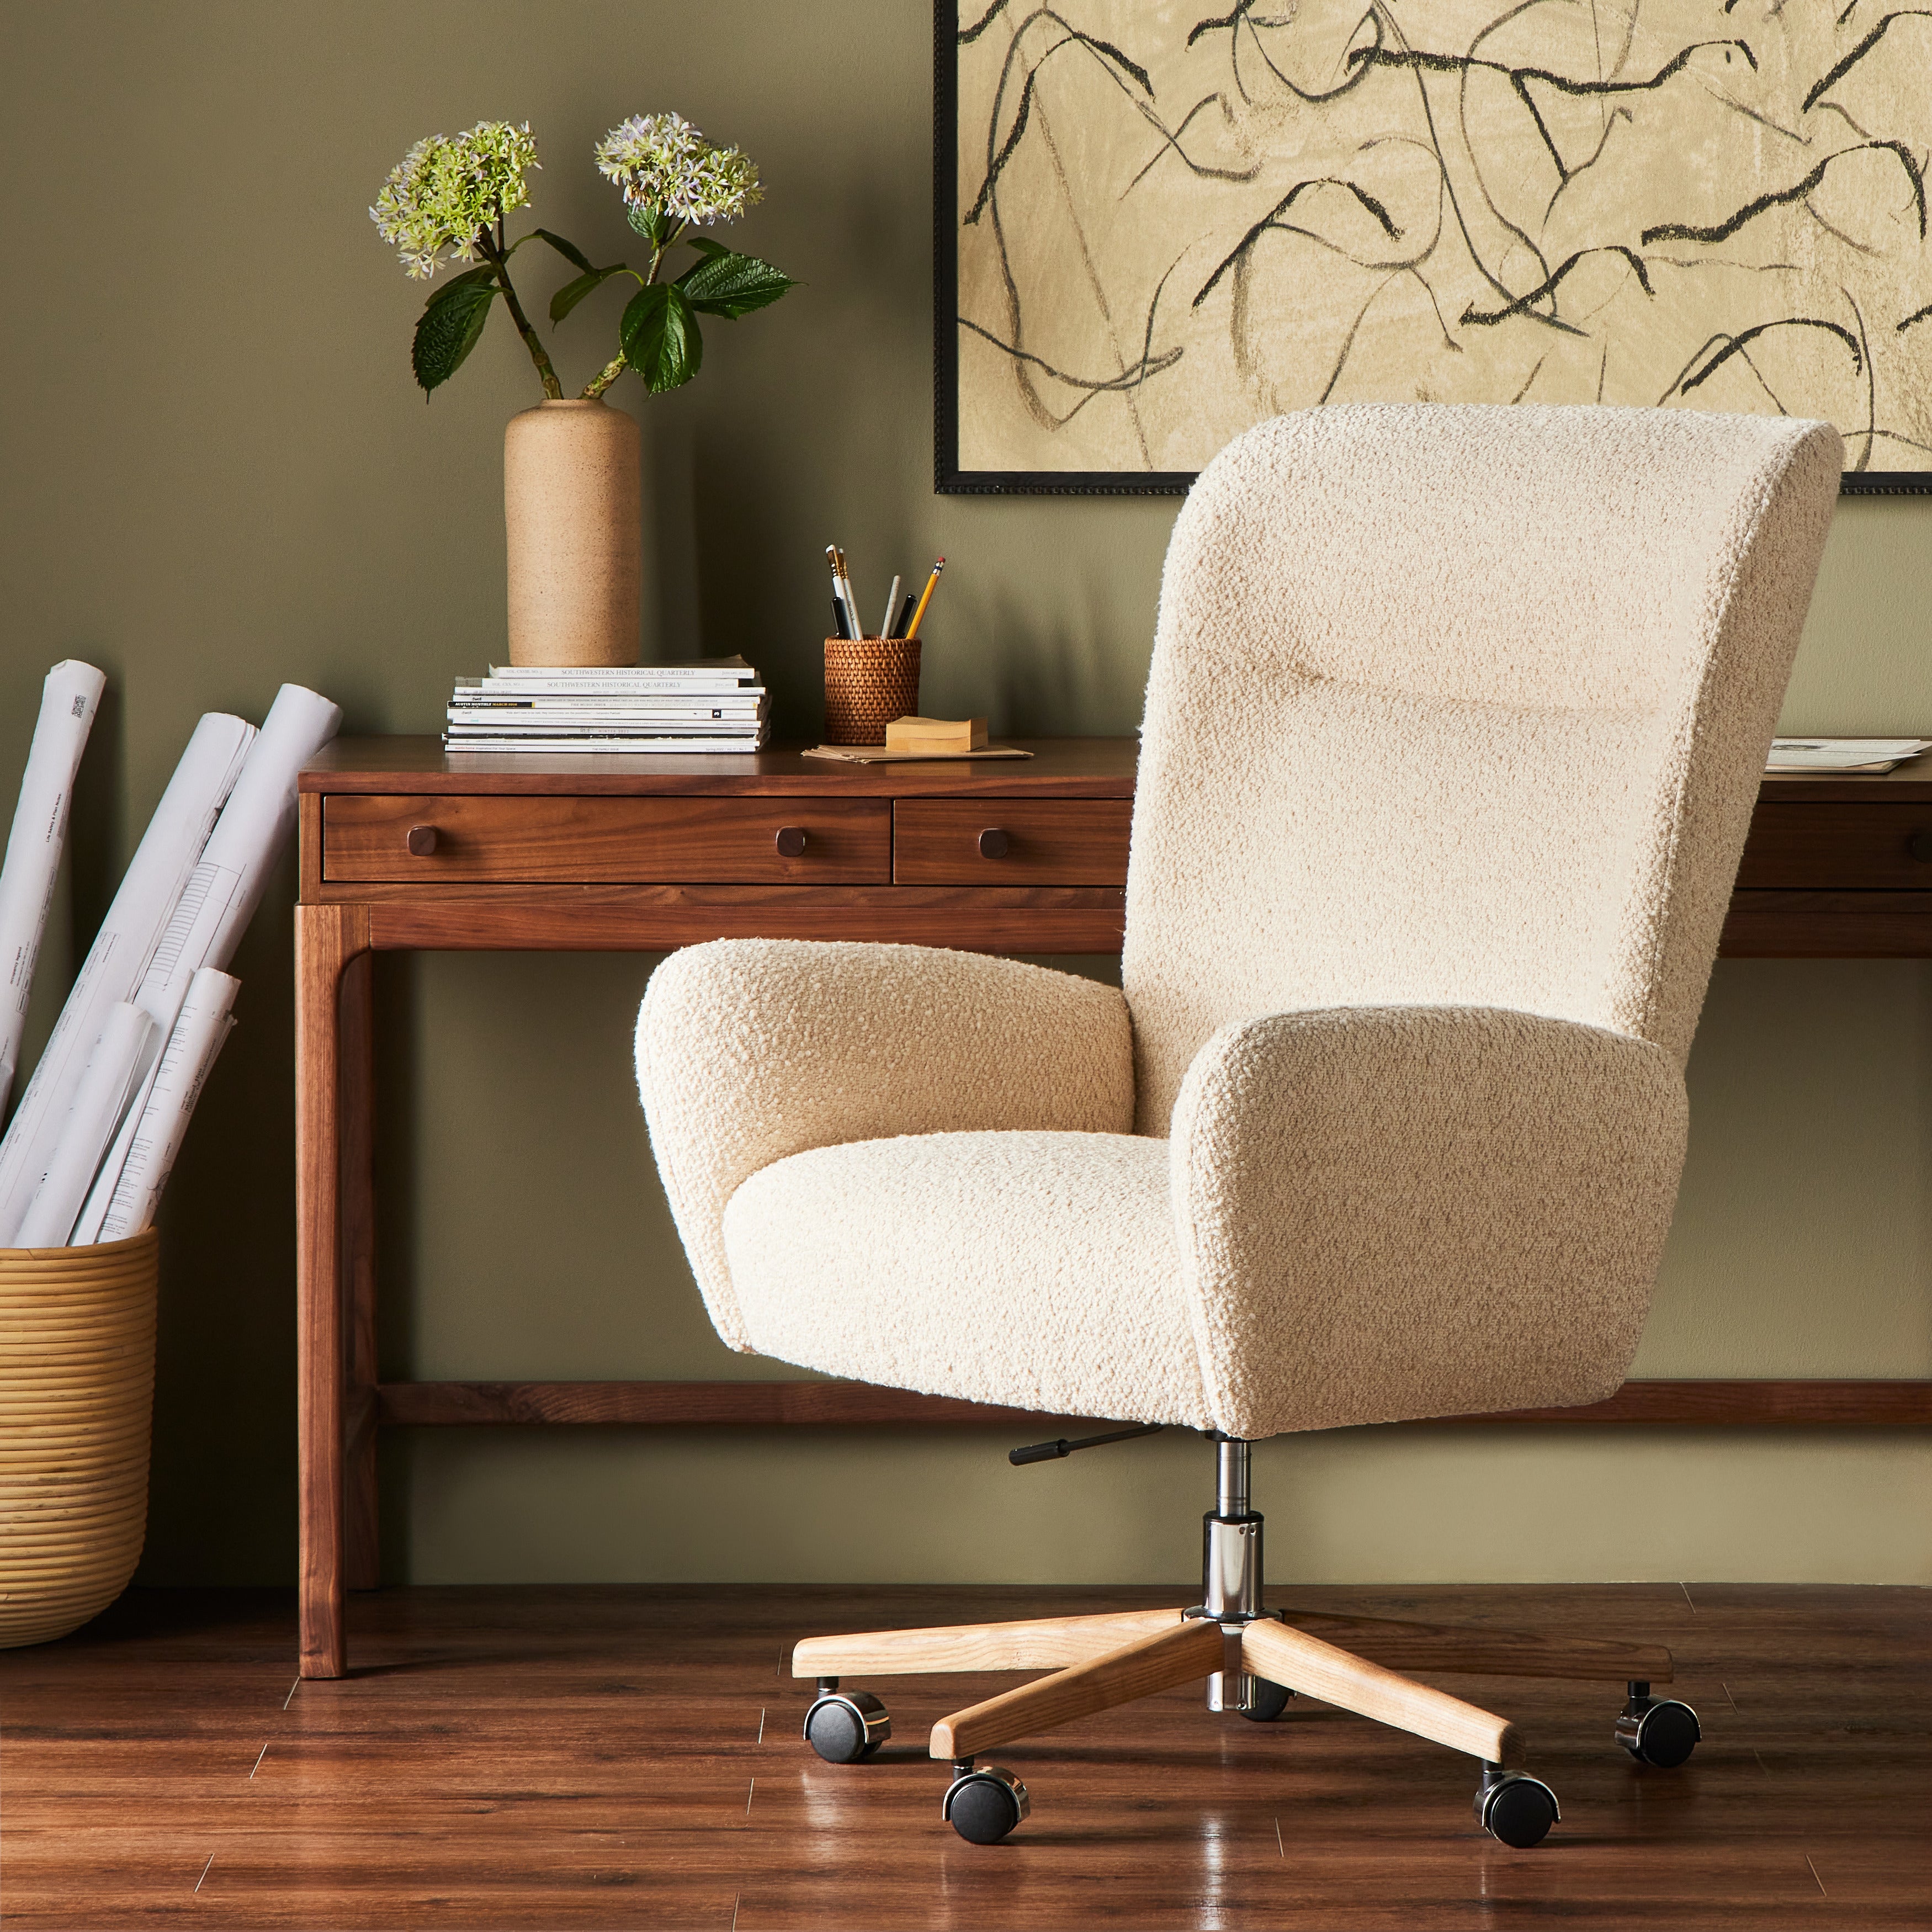 An executive-style chair is upholstered in a high-performance fabric, with subtle curves for a dramatic look and comfortable sit. Casters and seat heigh adjustability for ease in the modern office. Amethyst Home provides interior design, new construction, custom furniture, and area rugs in the Dallas metro area.